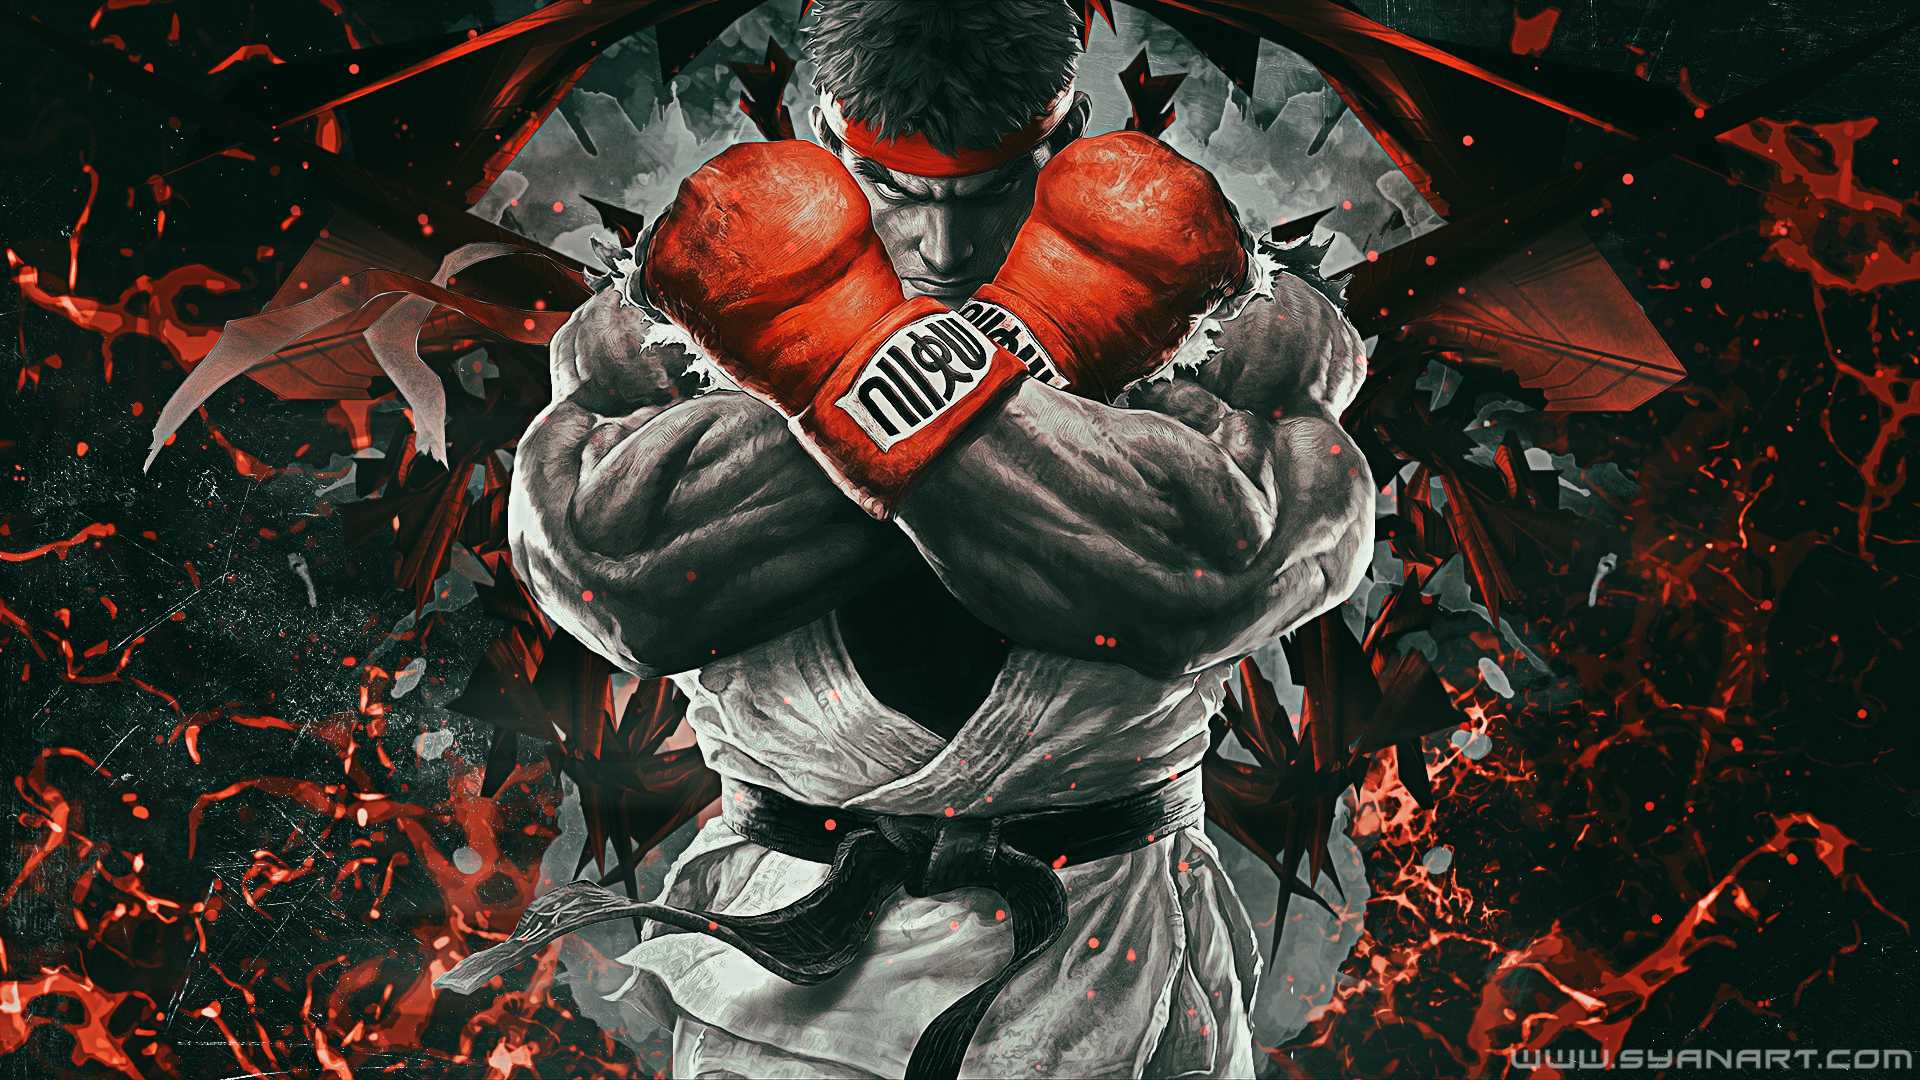 Street Fighter Wallpaper HD Image Widescreen Ryu For Computer